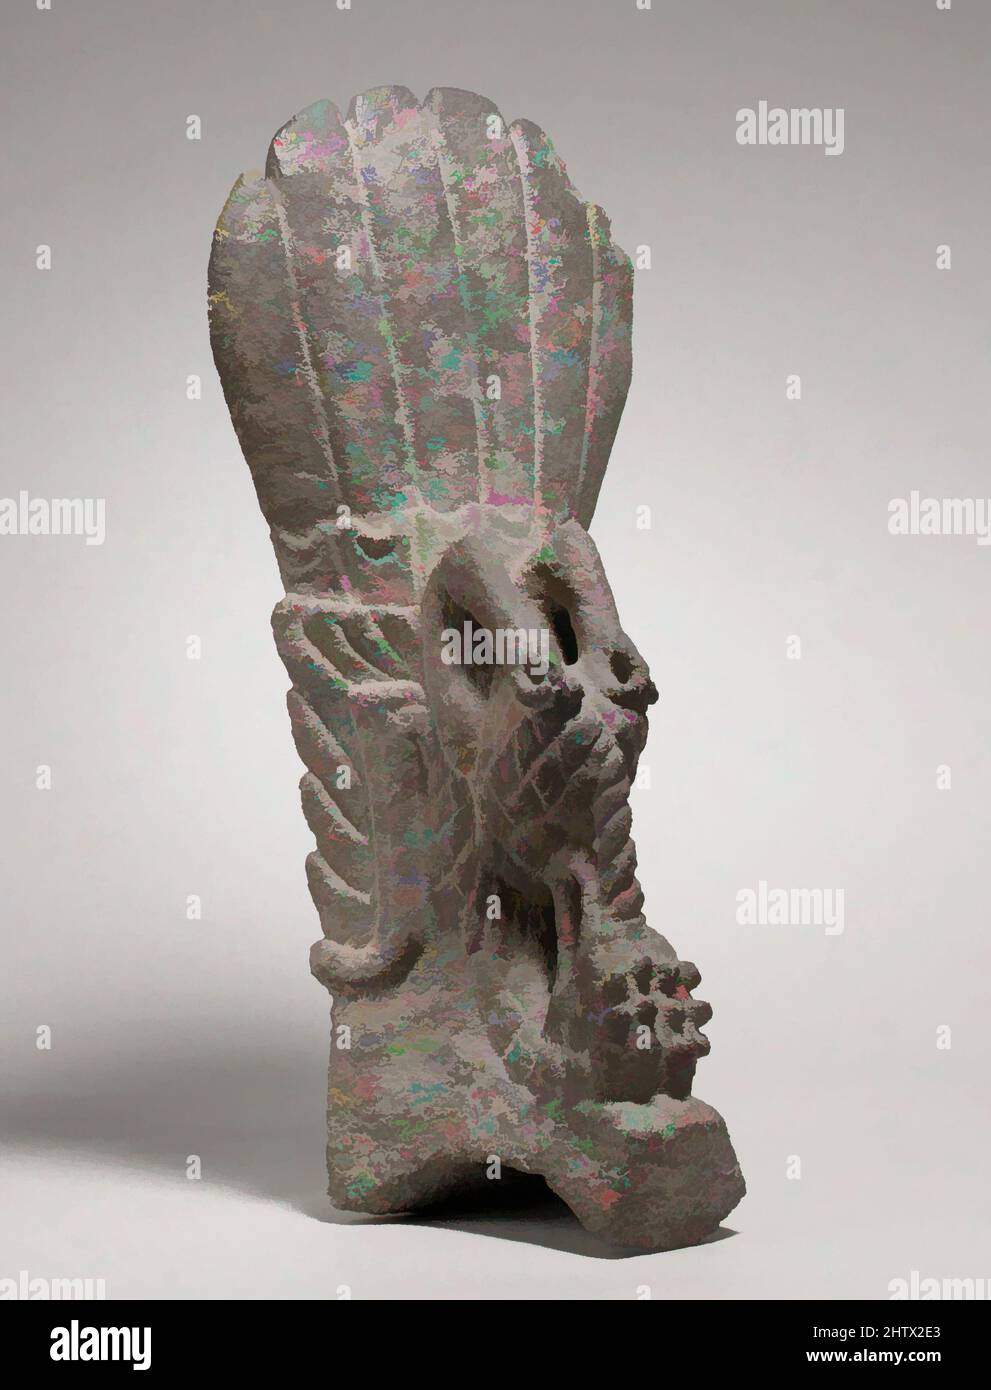 Art inspired by Turkey Palma, 7th–10th century, Mexico, Mesoamerica, Veracruz, Veracruz, Stone, Overall: 18 5/16 in. (46.59 cm), Stone-Sculpture, A number of blank palmas are known, but most are covered in imagery ranging from abstract swirls to full human and animal forms, often, Classic works modernized by Artotop with a splash of modernity. Shapes, color and value, eye-catching visual impact on art. Emotions through freedom of artworks in a contemporary way. A timeless message pursuing a wildly creative new direction. Artists turning to the digital medium and creating the Artotop NFT Stock Photo